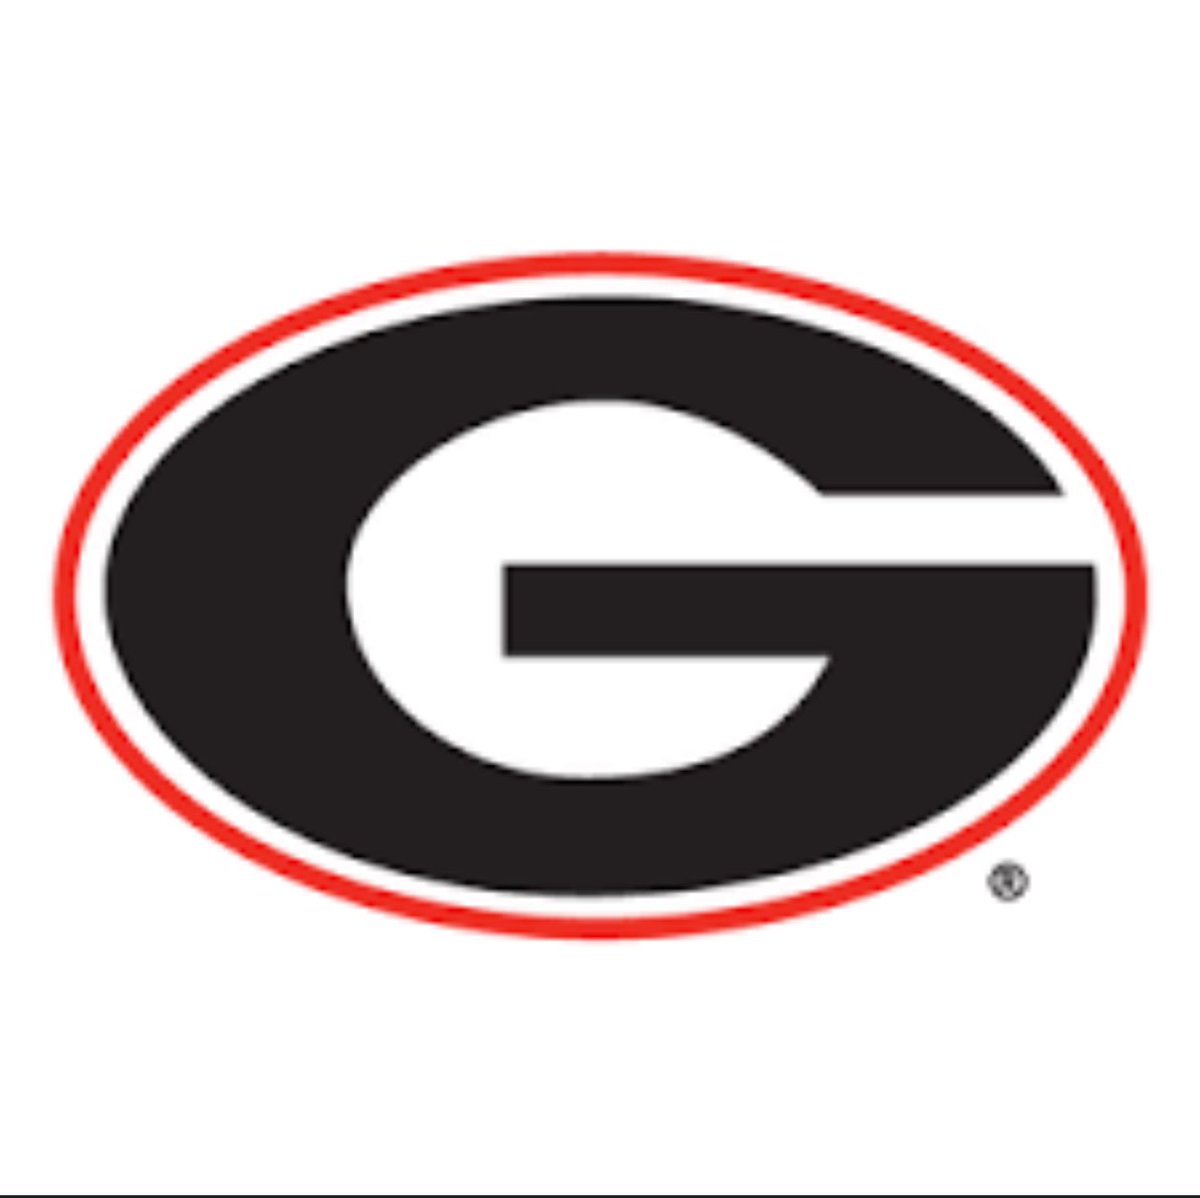 I Will be back at the University of Georgia this weekend for GDAY! @On3sports @On3Recruits @AthensAcademyFB @RecruitGeorgia @RustyMansell_